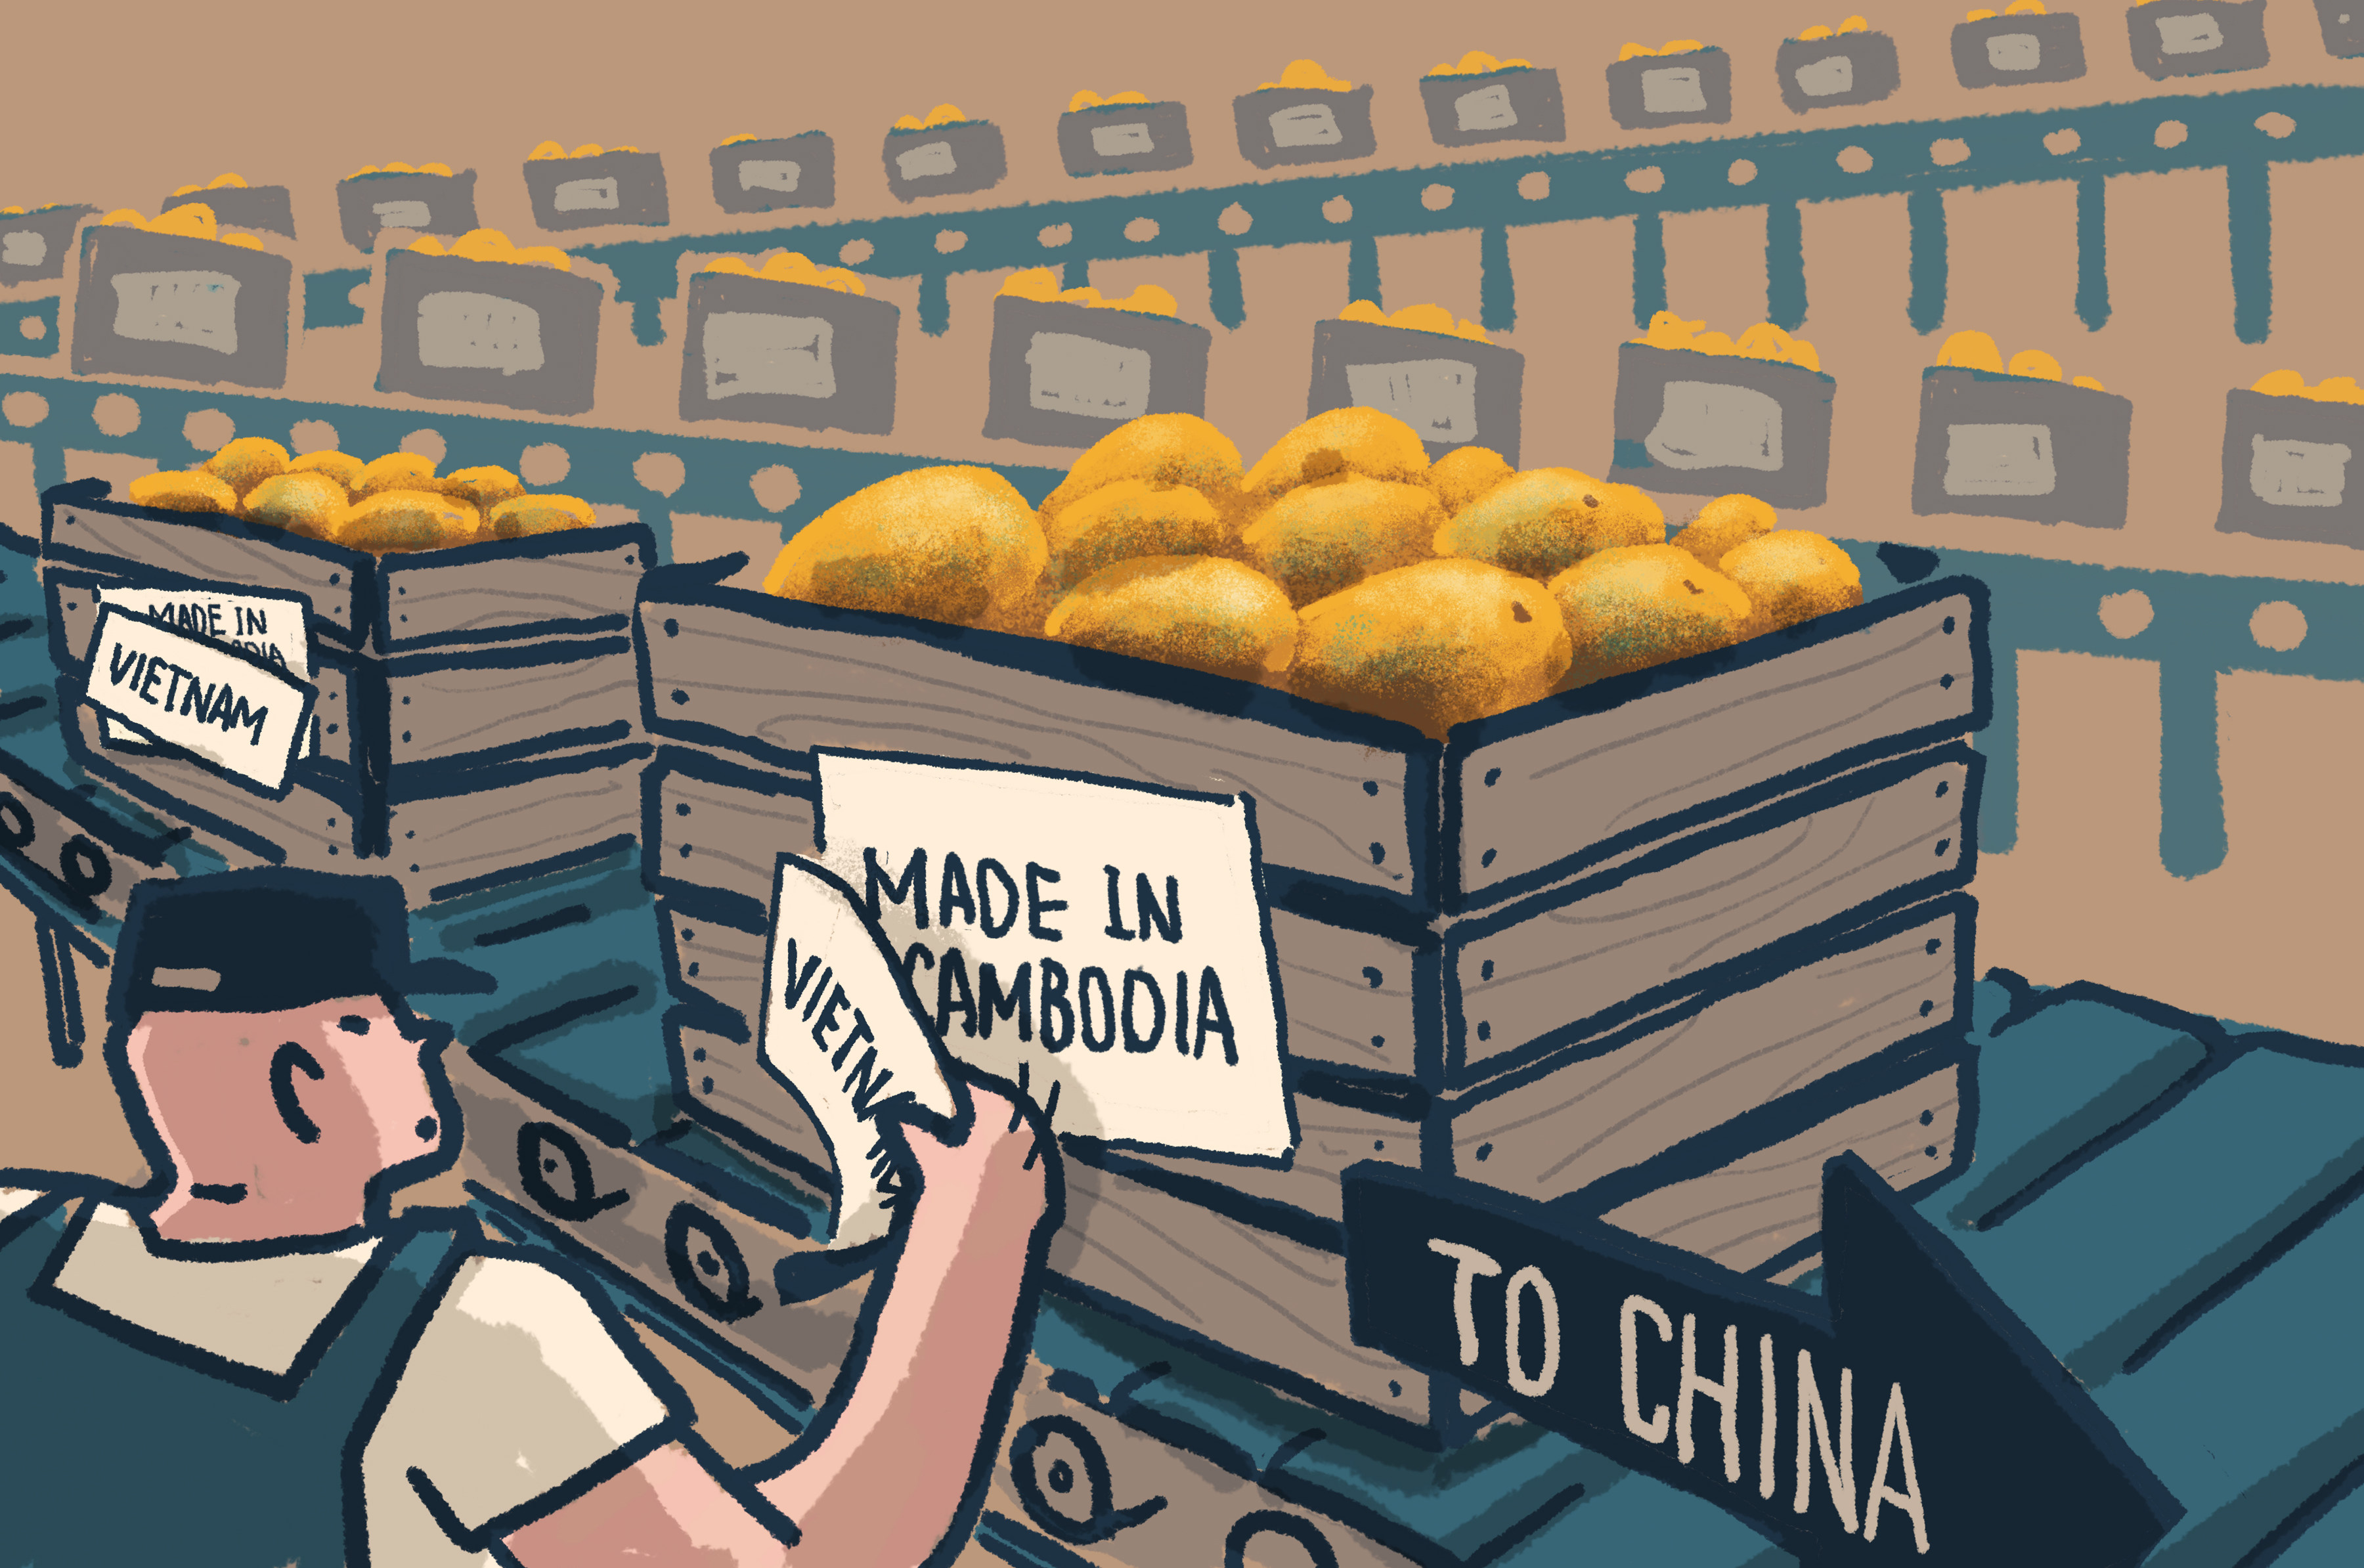 Cambodian mangoes were once labelled ‘Made in Vietnam’ before being exported to China. Image: SCMP